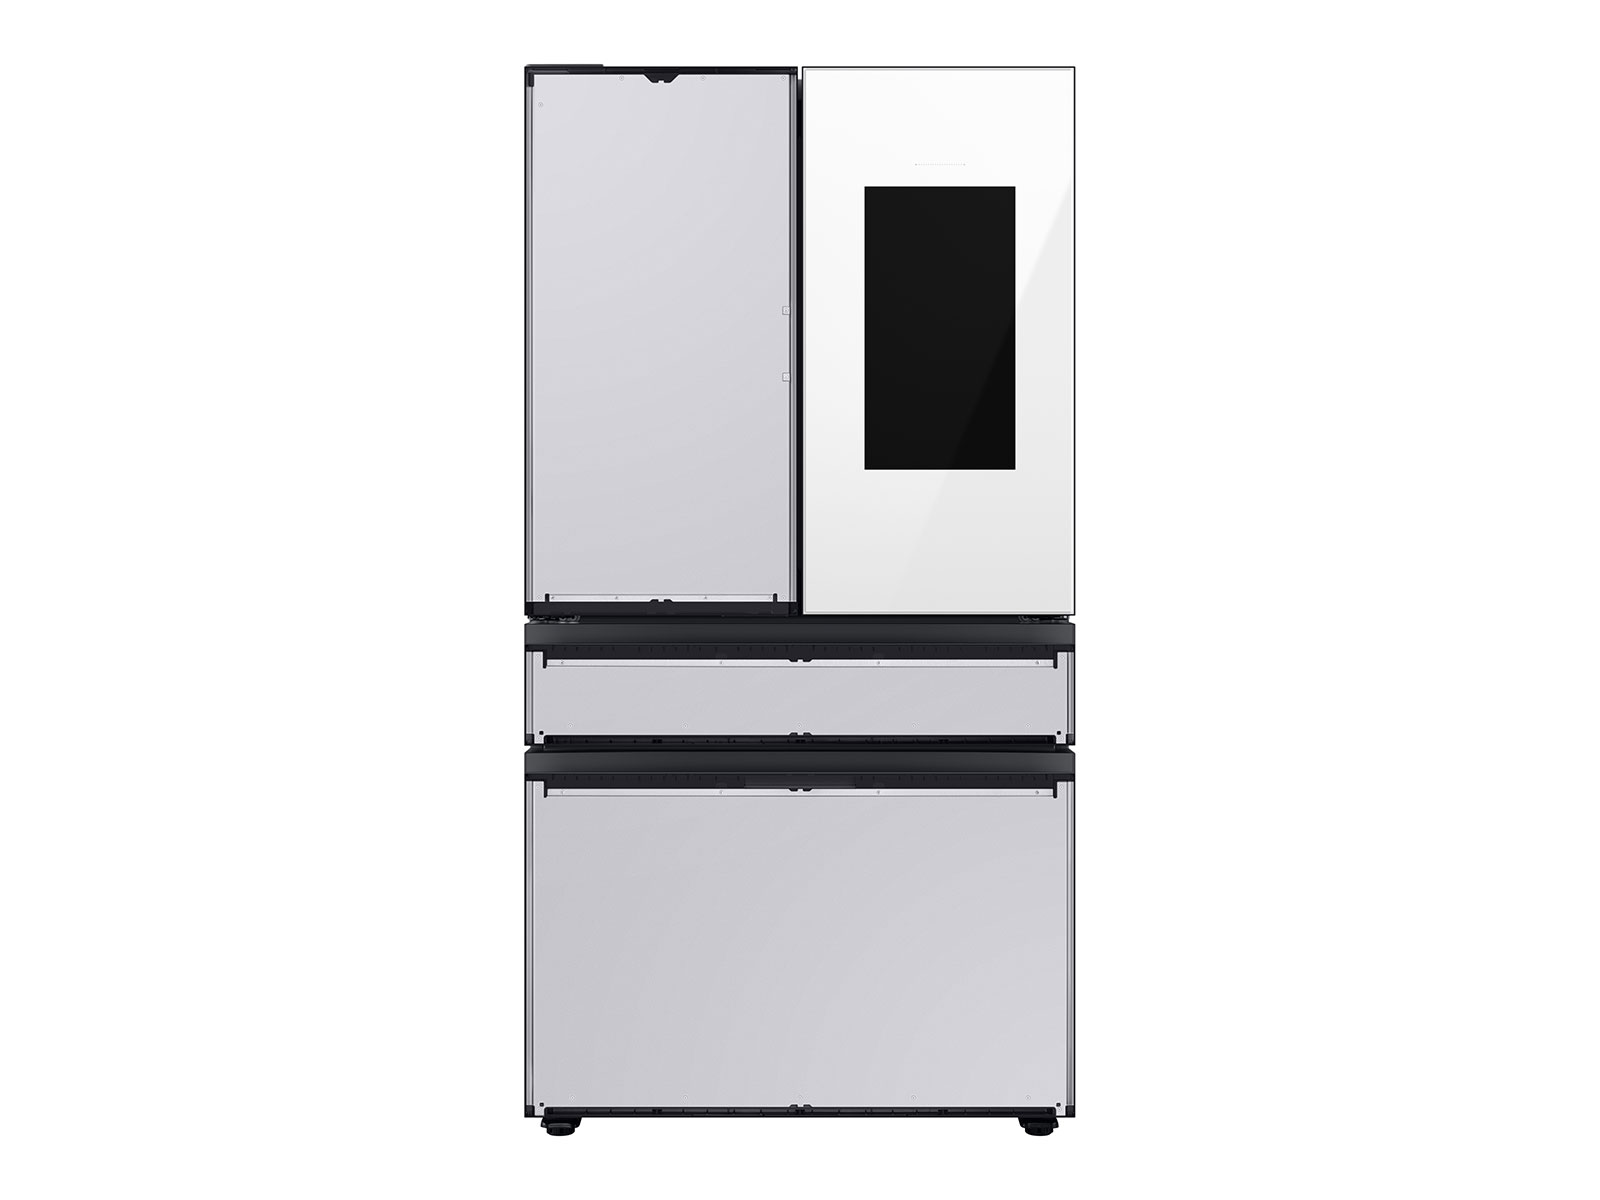 Samsung Bespoke 4-Door French Door Refrigerator in Charcoal Glass with Customizable Panel Colors (23 cu. ft.) - with Family Hub™ Panel in White Glass - in Charcoal Glass with Customizable Panel Colors (with Customizable Panel Colors)